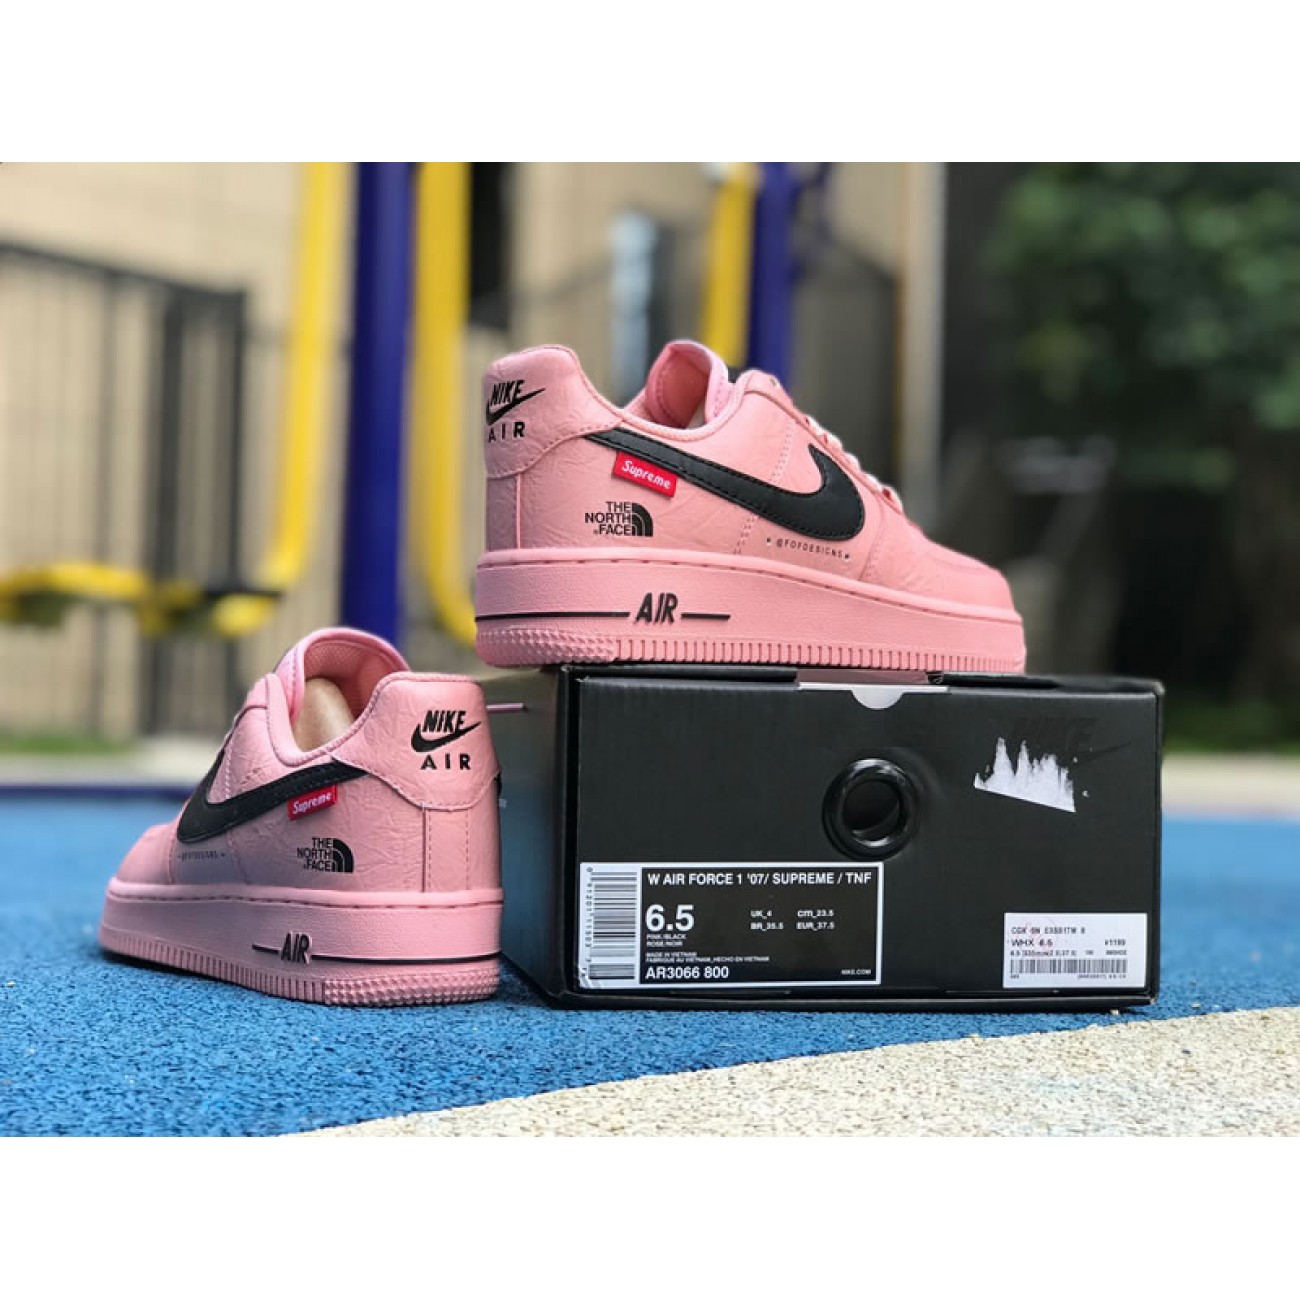 Supreme® x The North Face x Nike Air Force 1 Sup AF1 Low "Pink/Black" AR3066-800